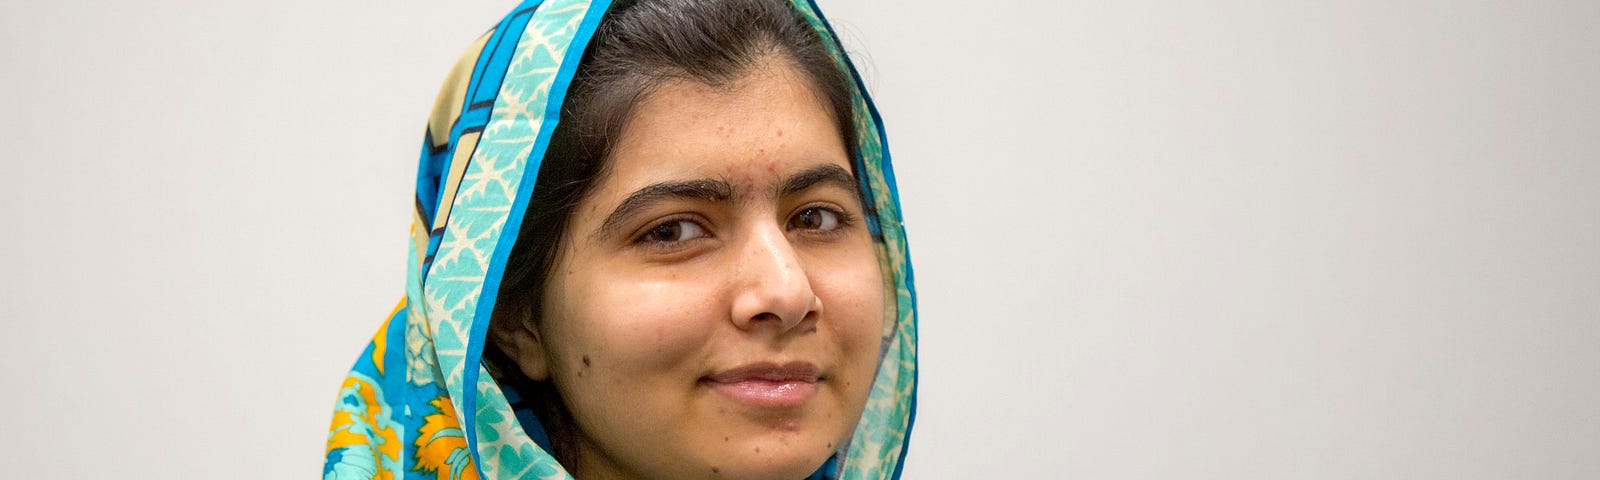 Malala dressed beautifully in colorful attire